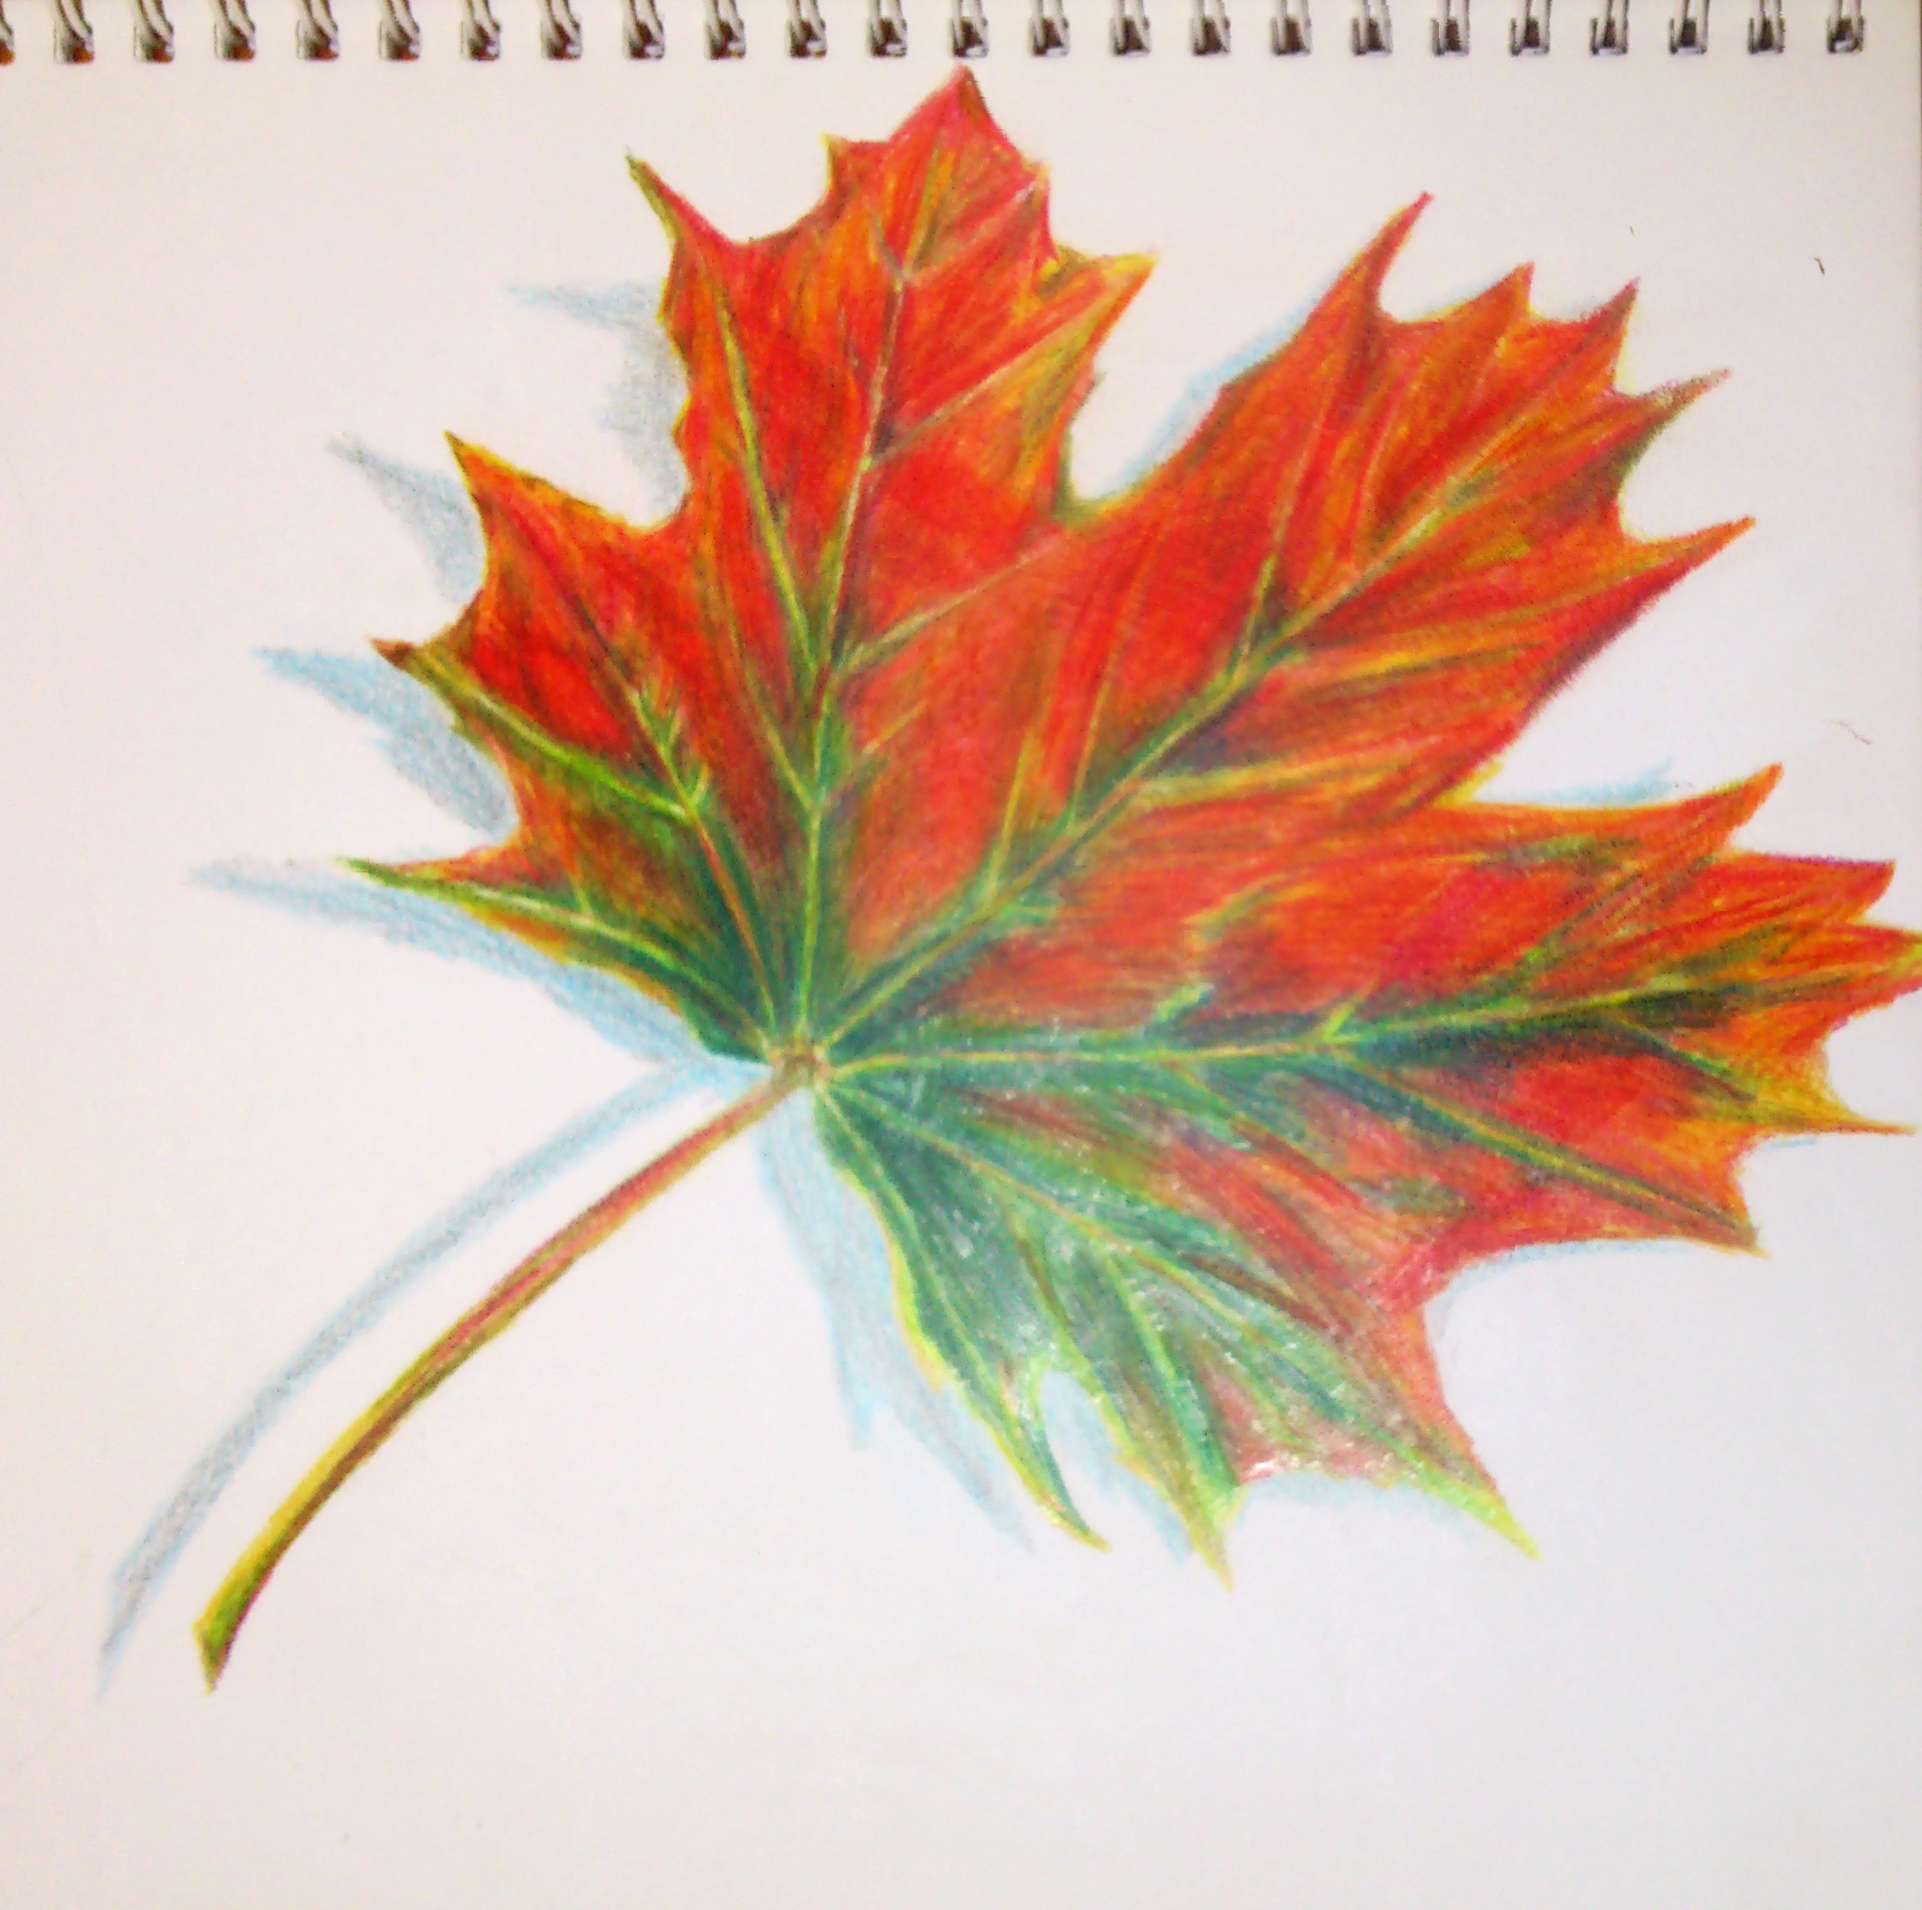 Autumn leaf (colored pencils) by KamilaM94 on DeviantArt